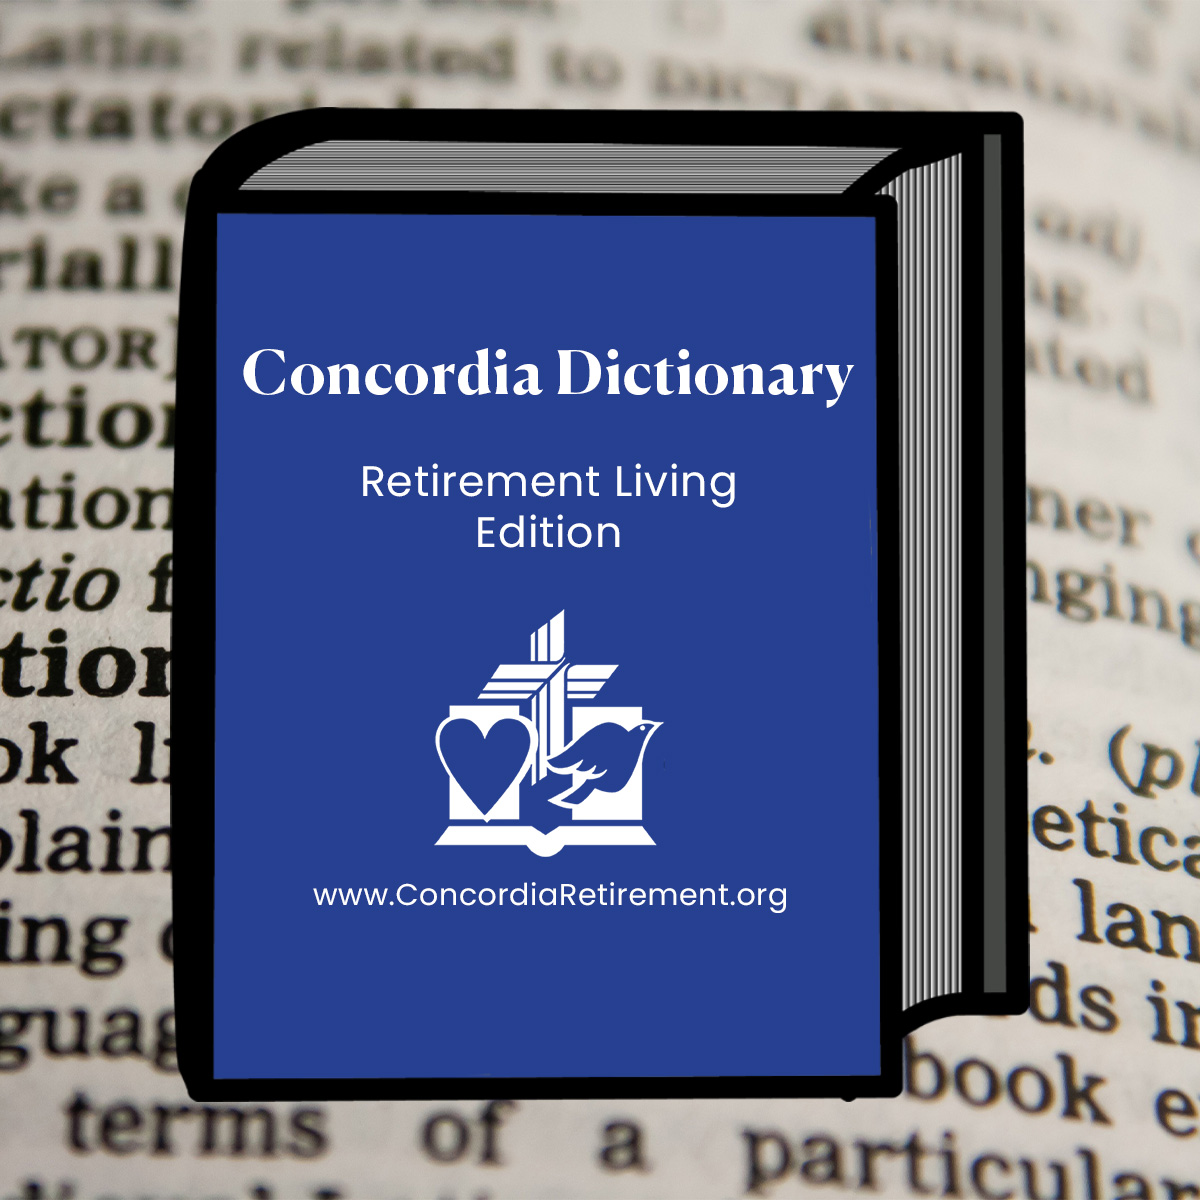 A digital graphic showing a Concordia Dictionary